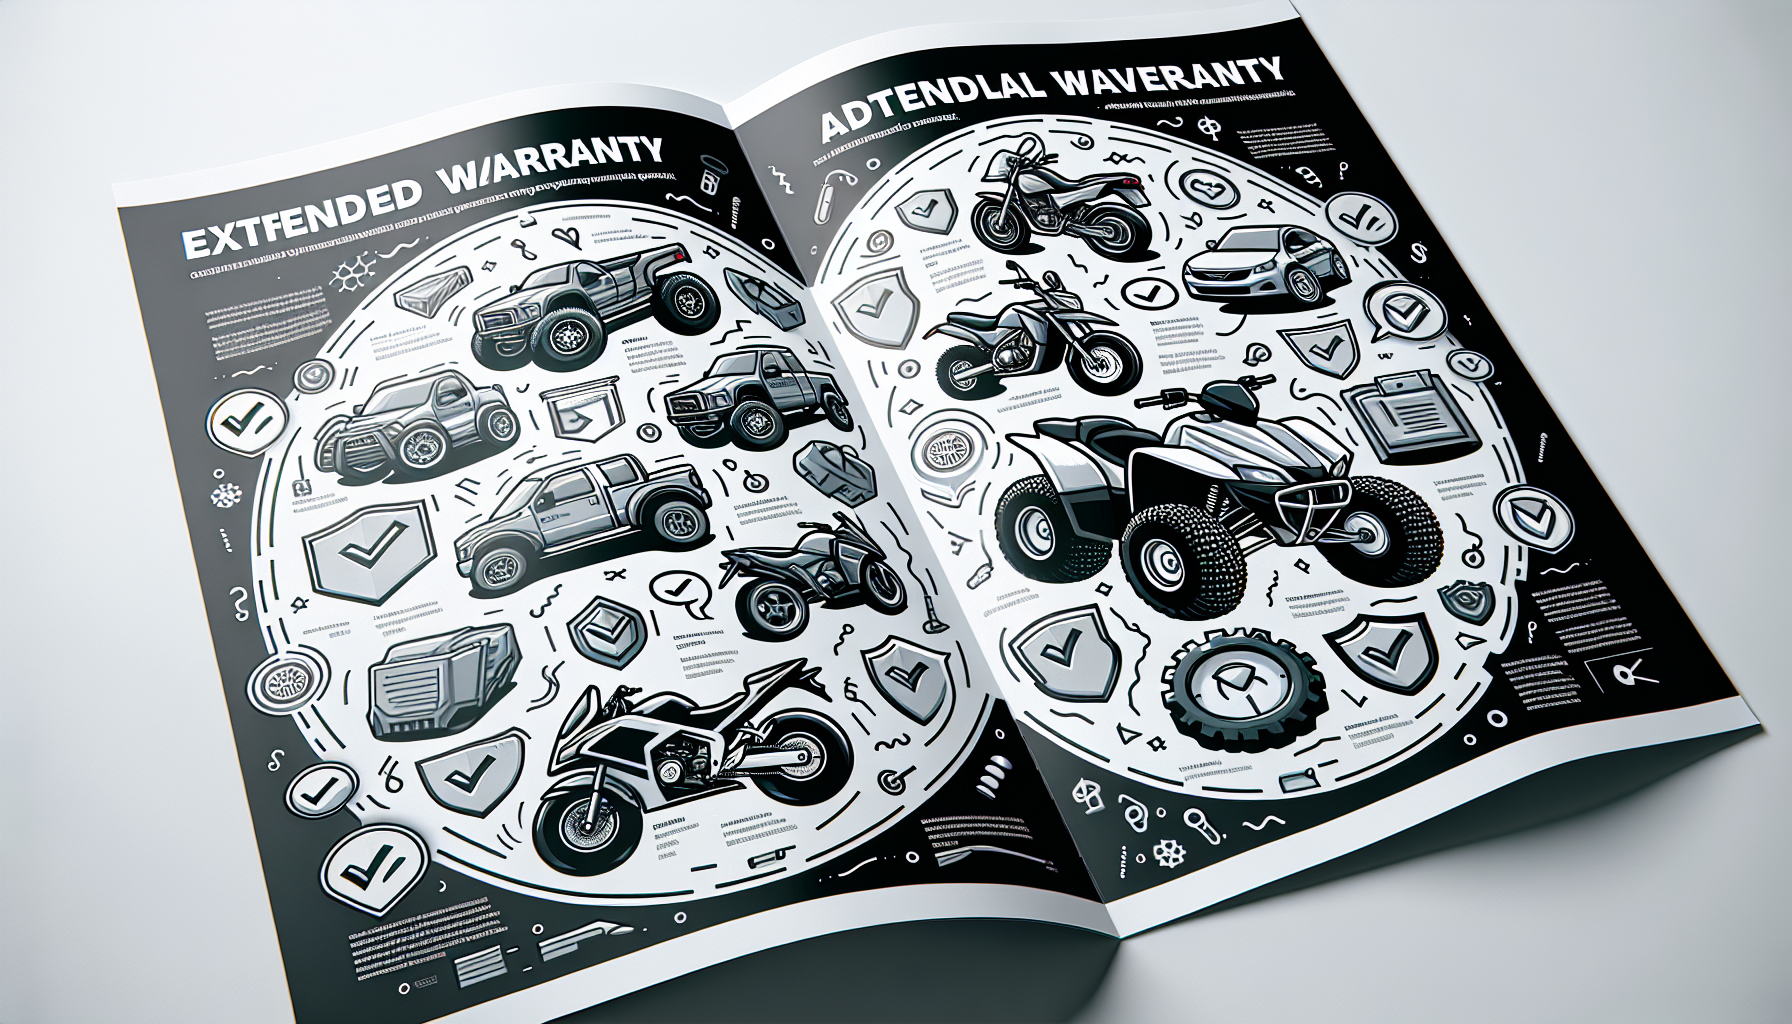 Extended warranty options brochure for powersports vehicles